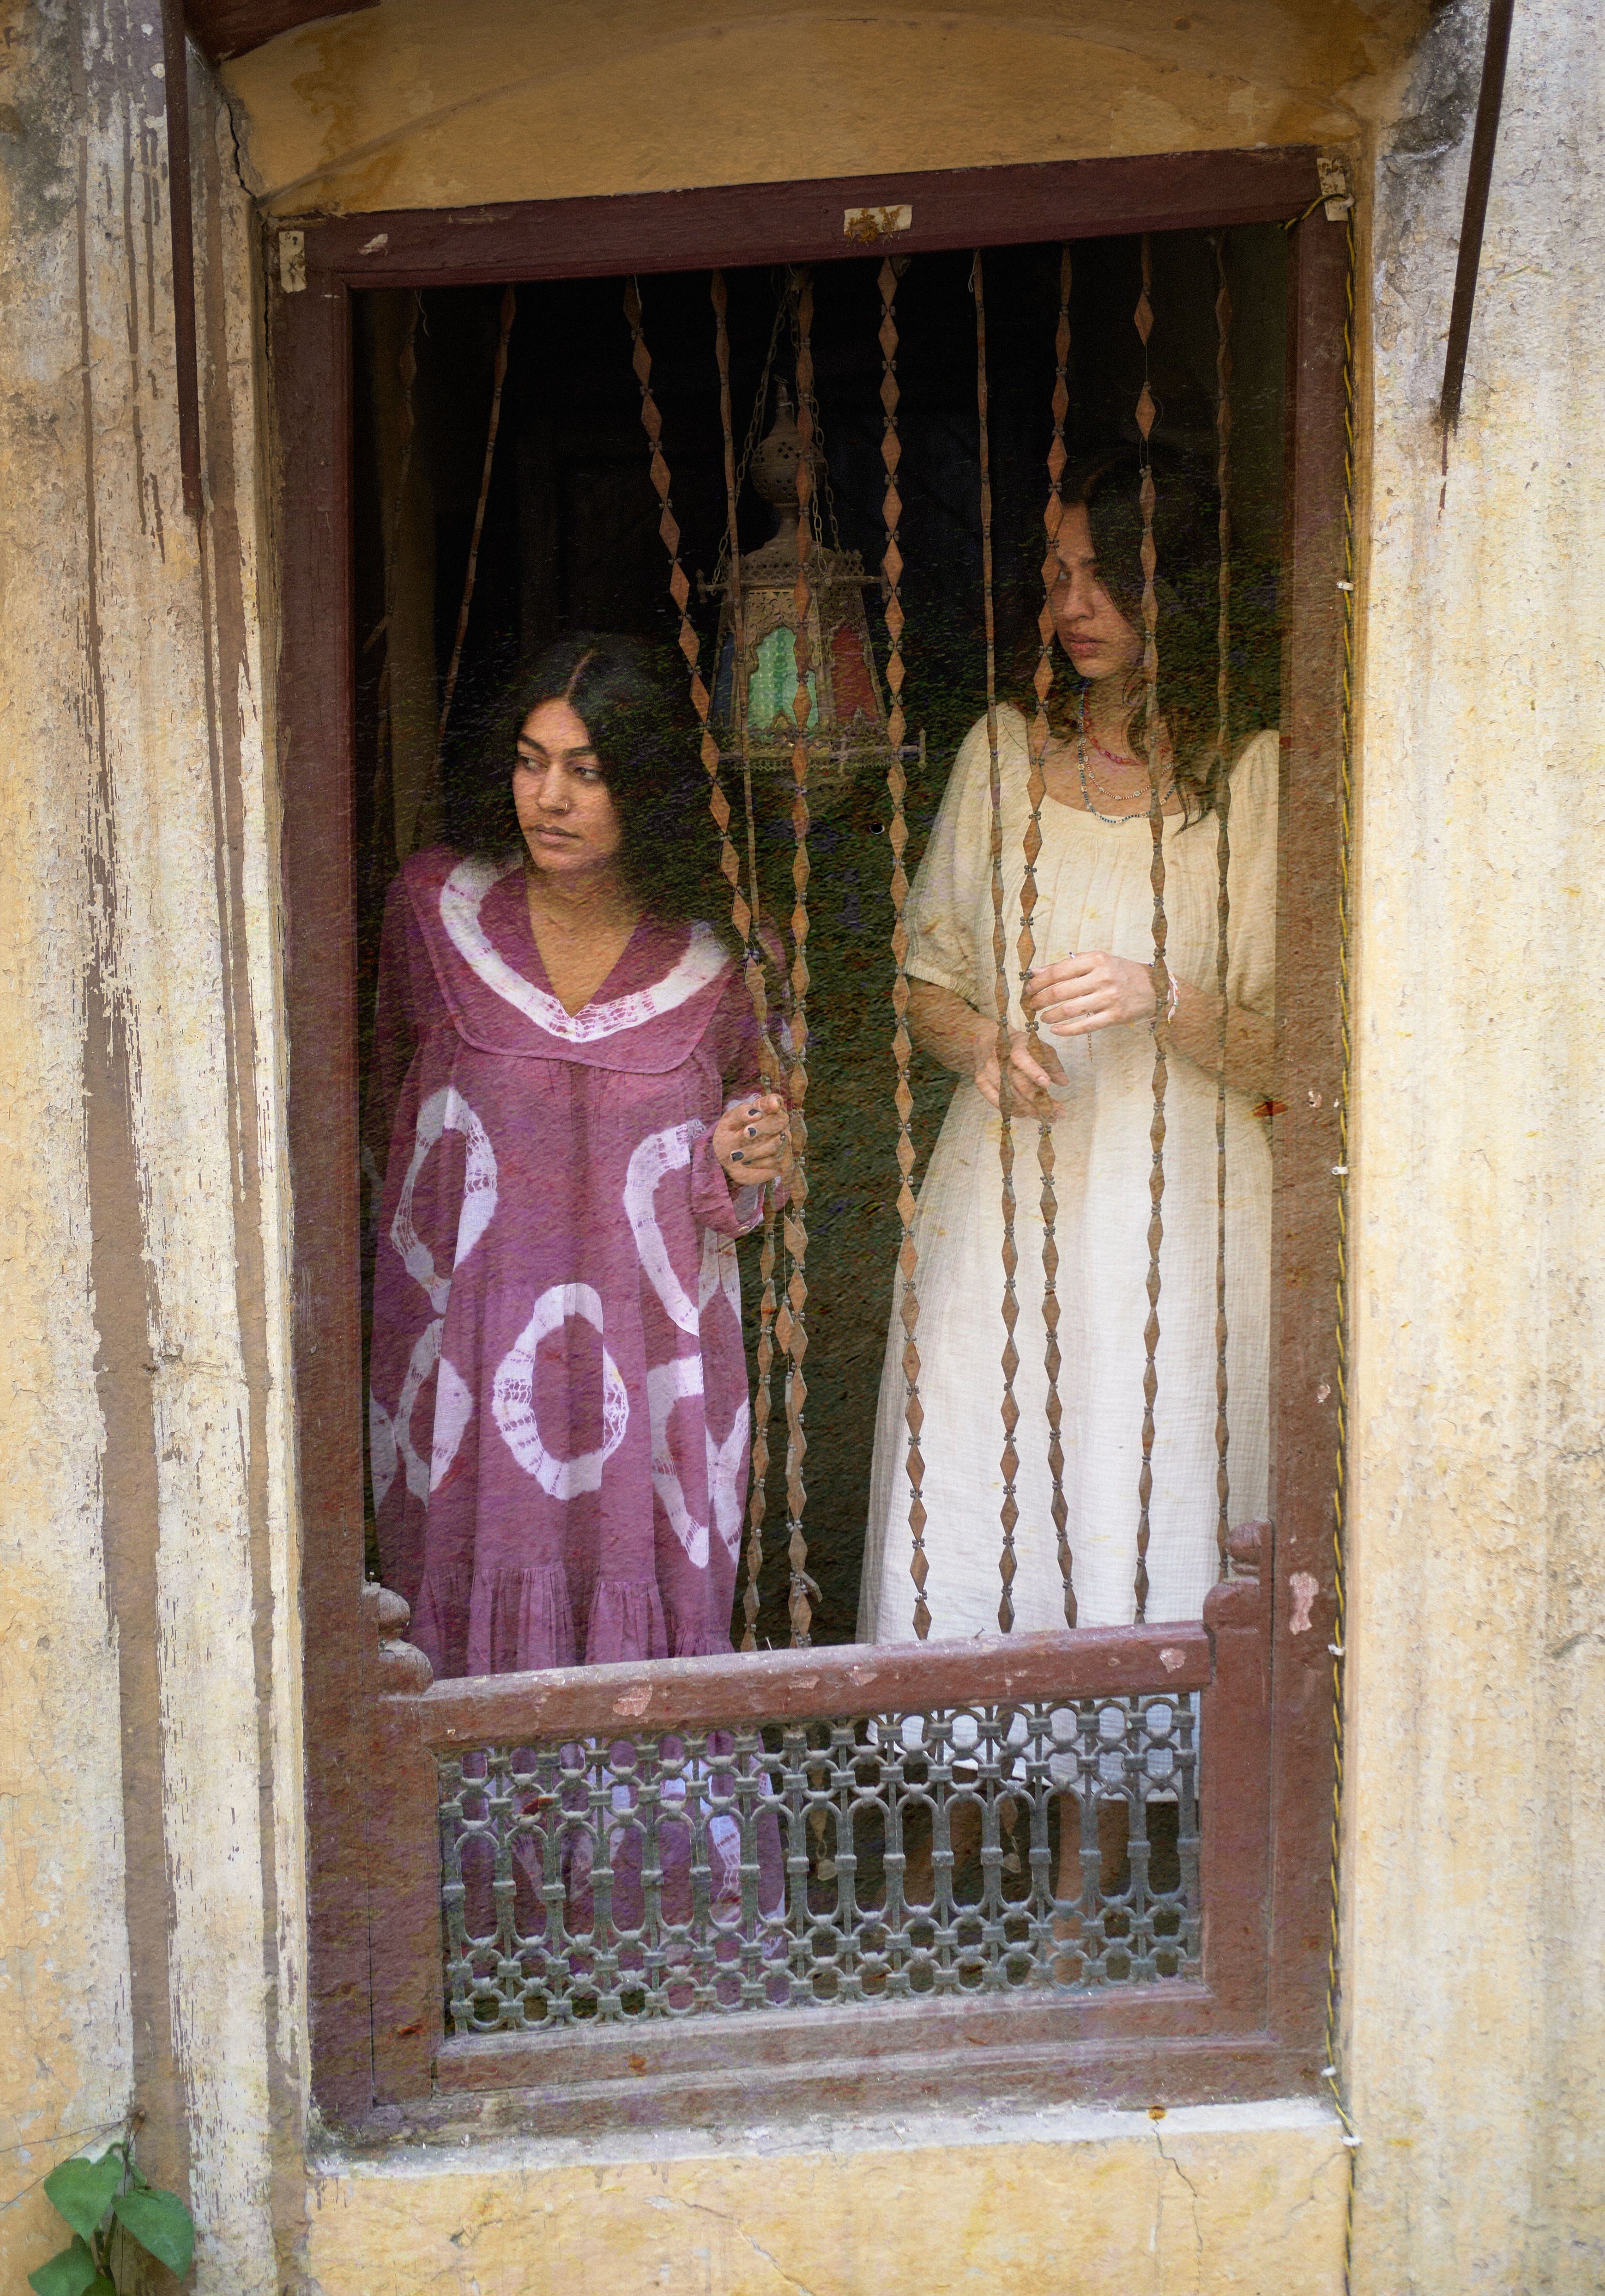 Postcards from Lahore: Alina y Meher